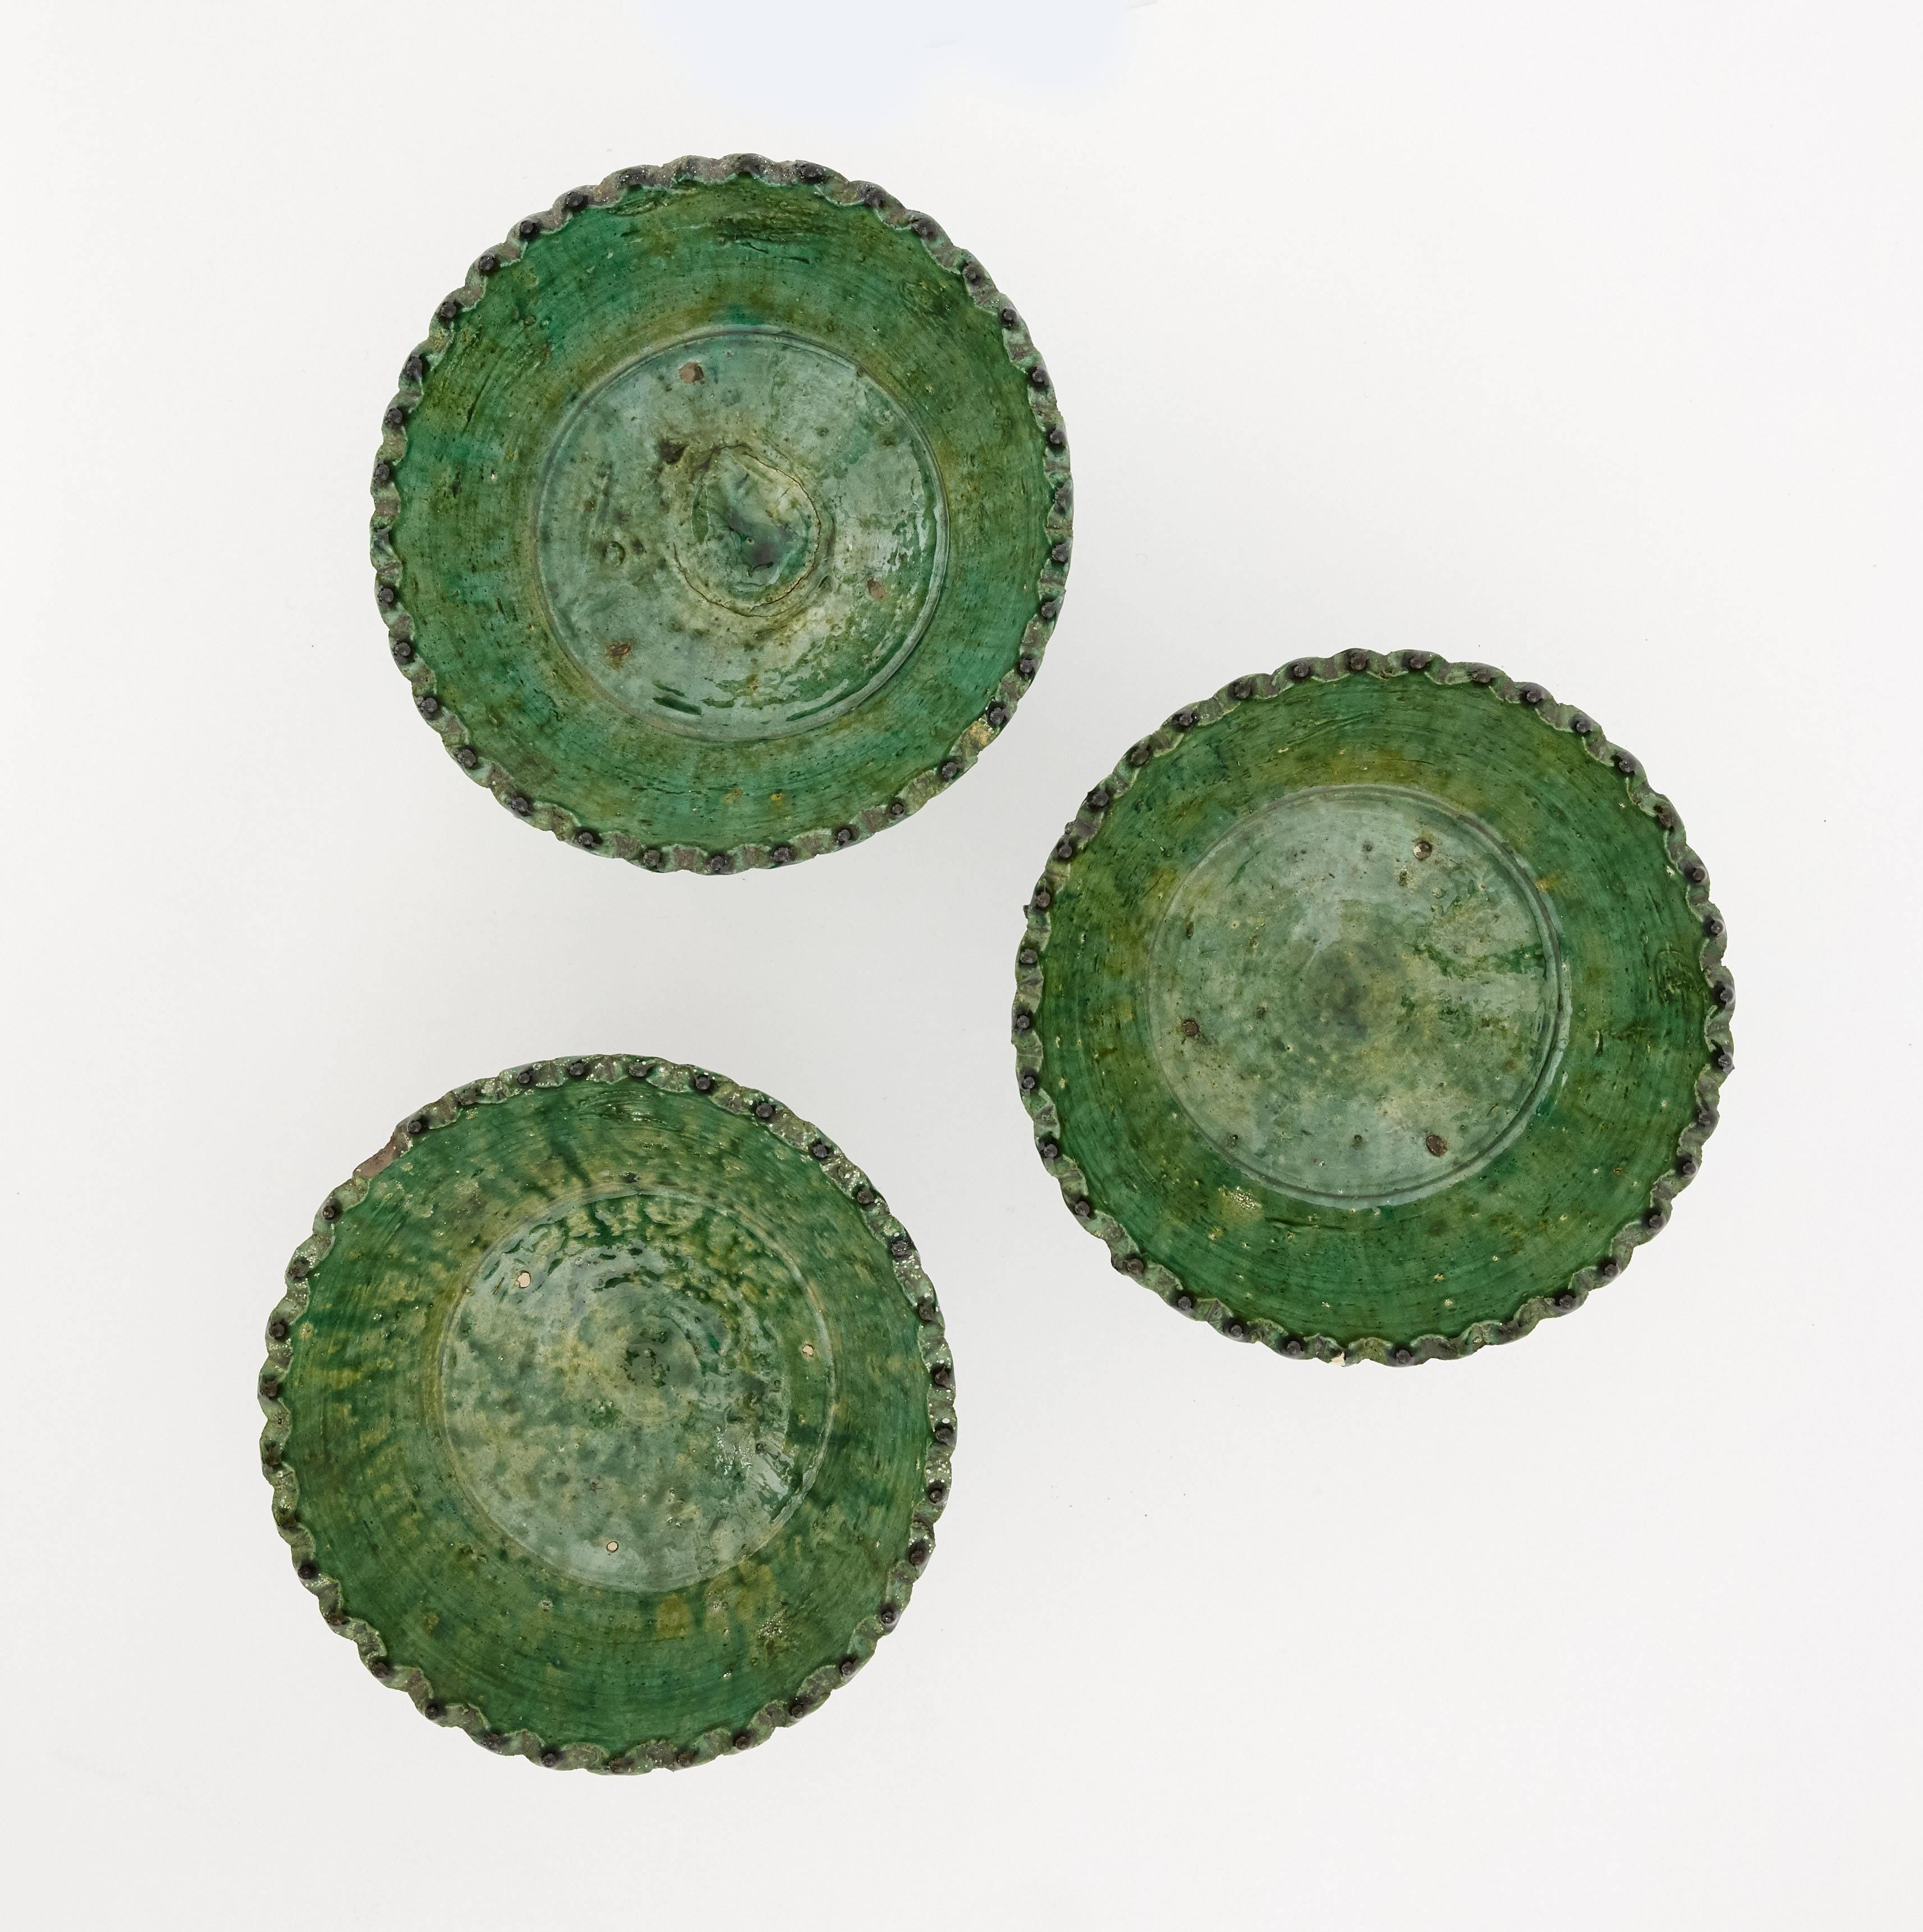 This set of three ivy green glazed ceramic bowls are handcrafted by a local craftman in Morocco. They have a beautifully organic structure which was carved by hand and glazed in a natural green finish. One of a kind pieces and perfect as ornamental